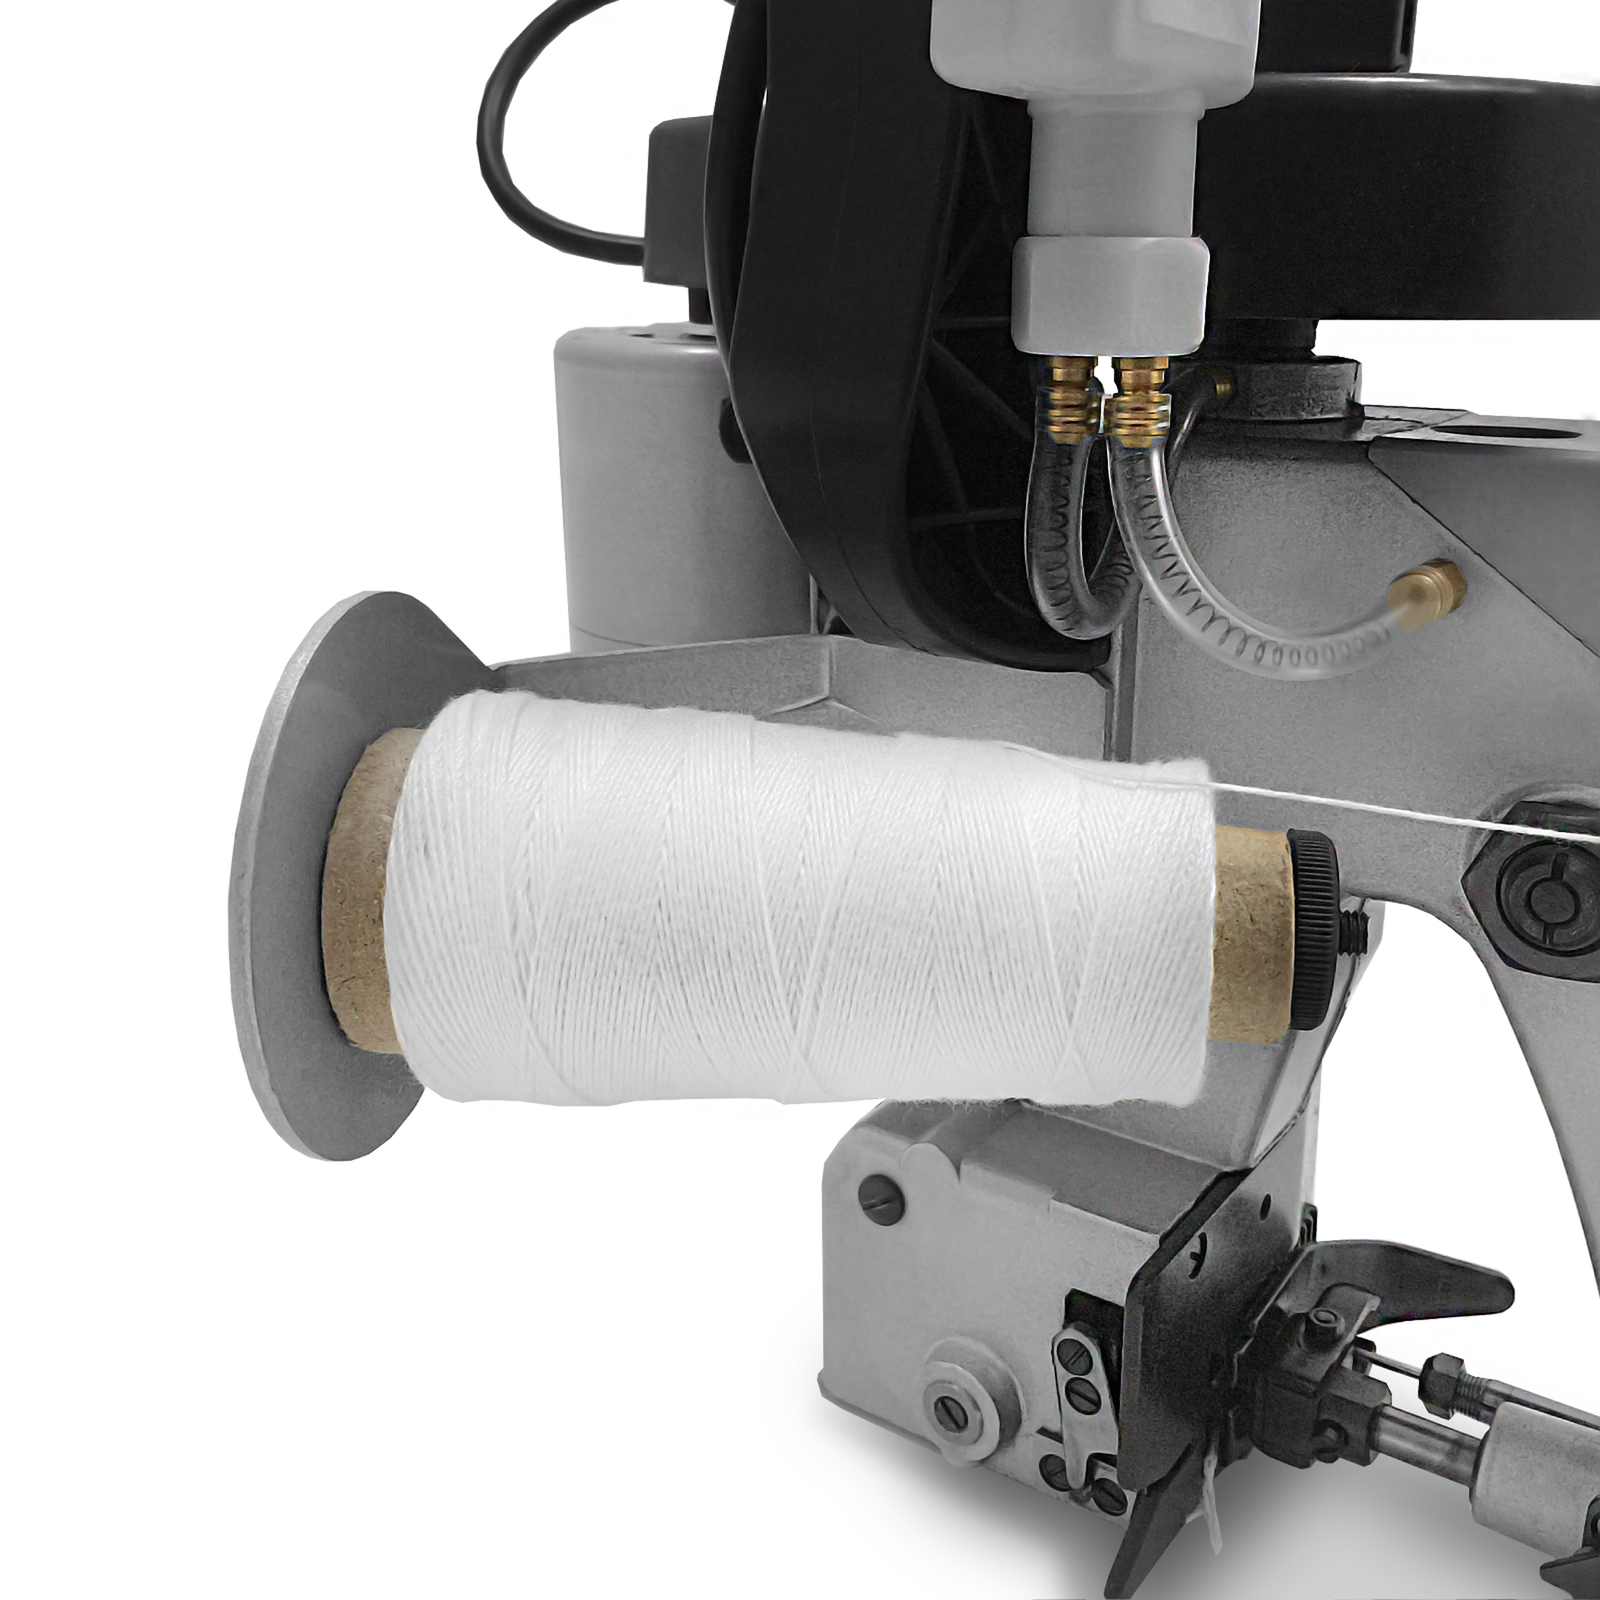 JORESTECH Manual Stitcher/Sewing Machine with 4 Thread Rolls Included